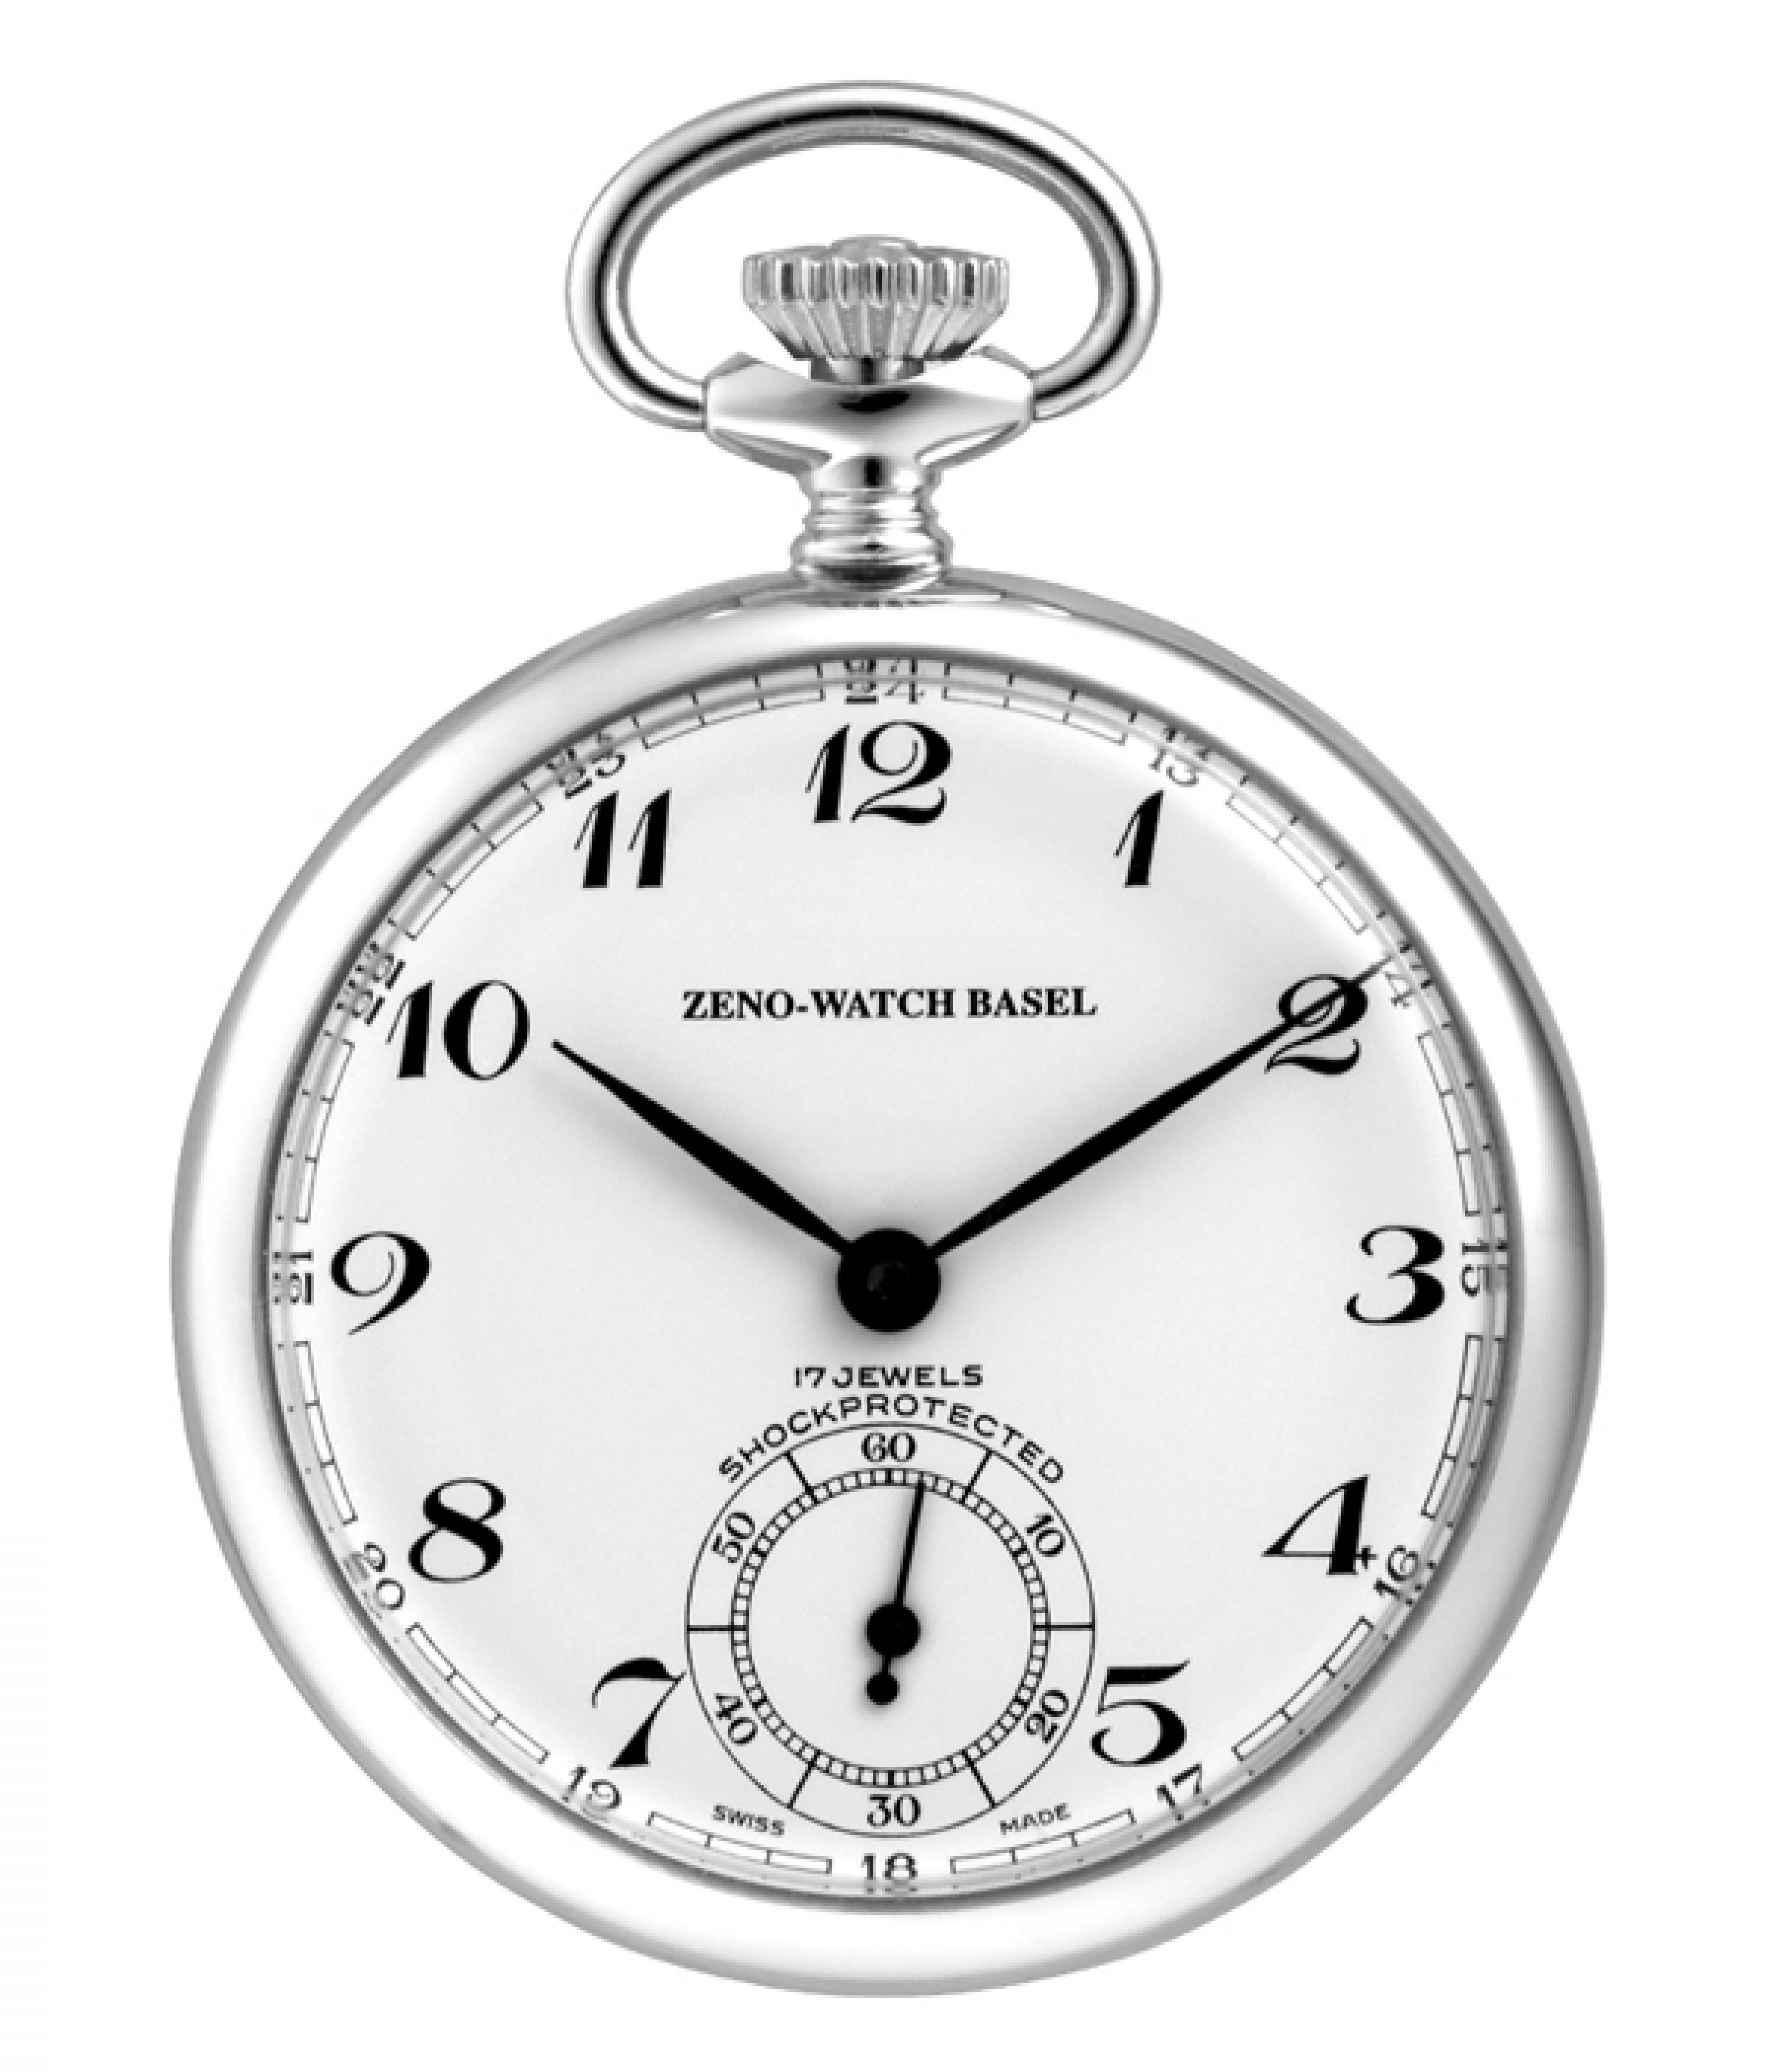 Pocket Watch Line Drawing at GetDrawings | Free download